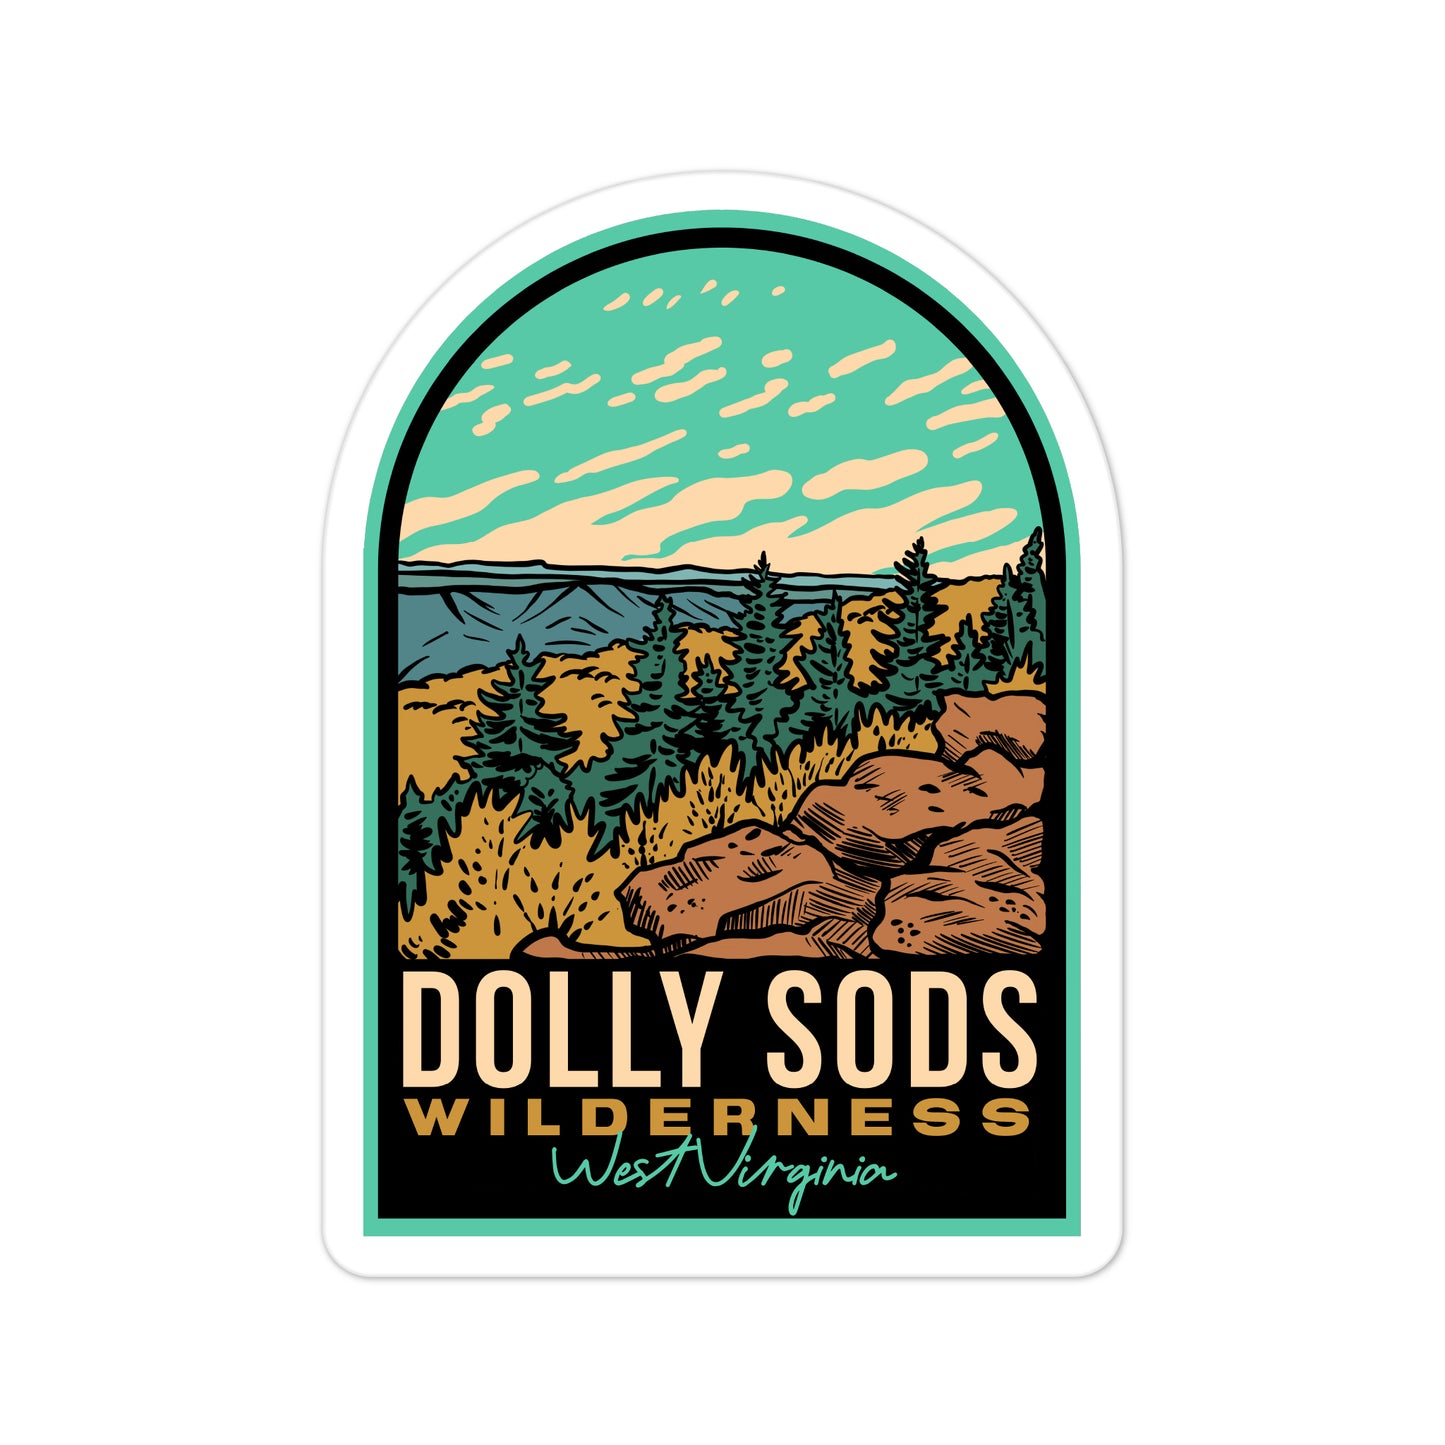 A sticker of Dolly Sods Wilderness